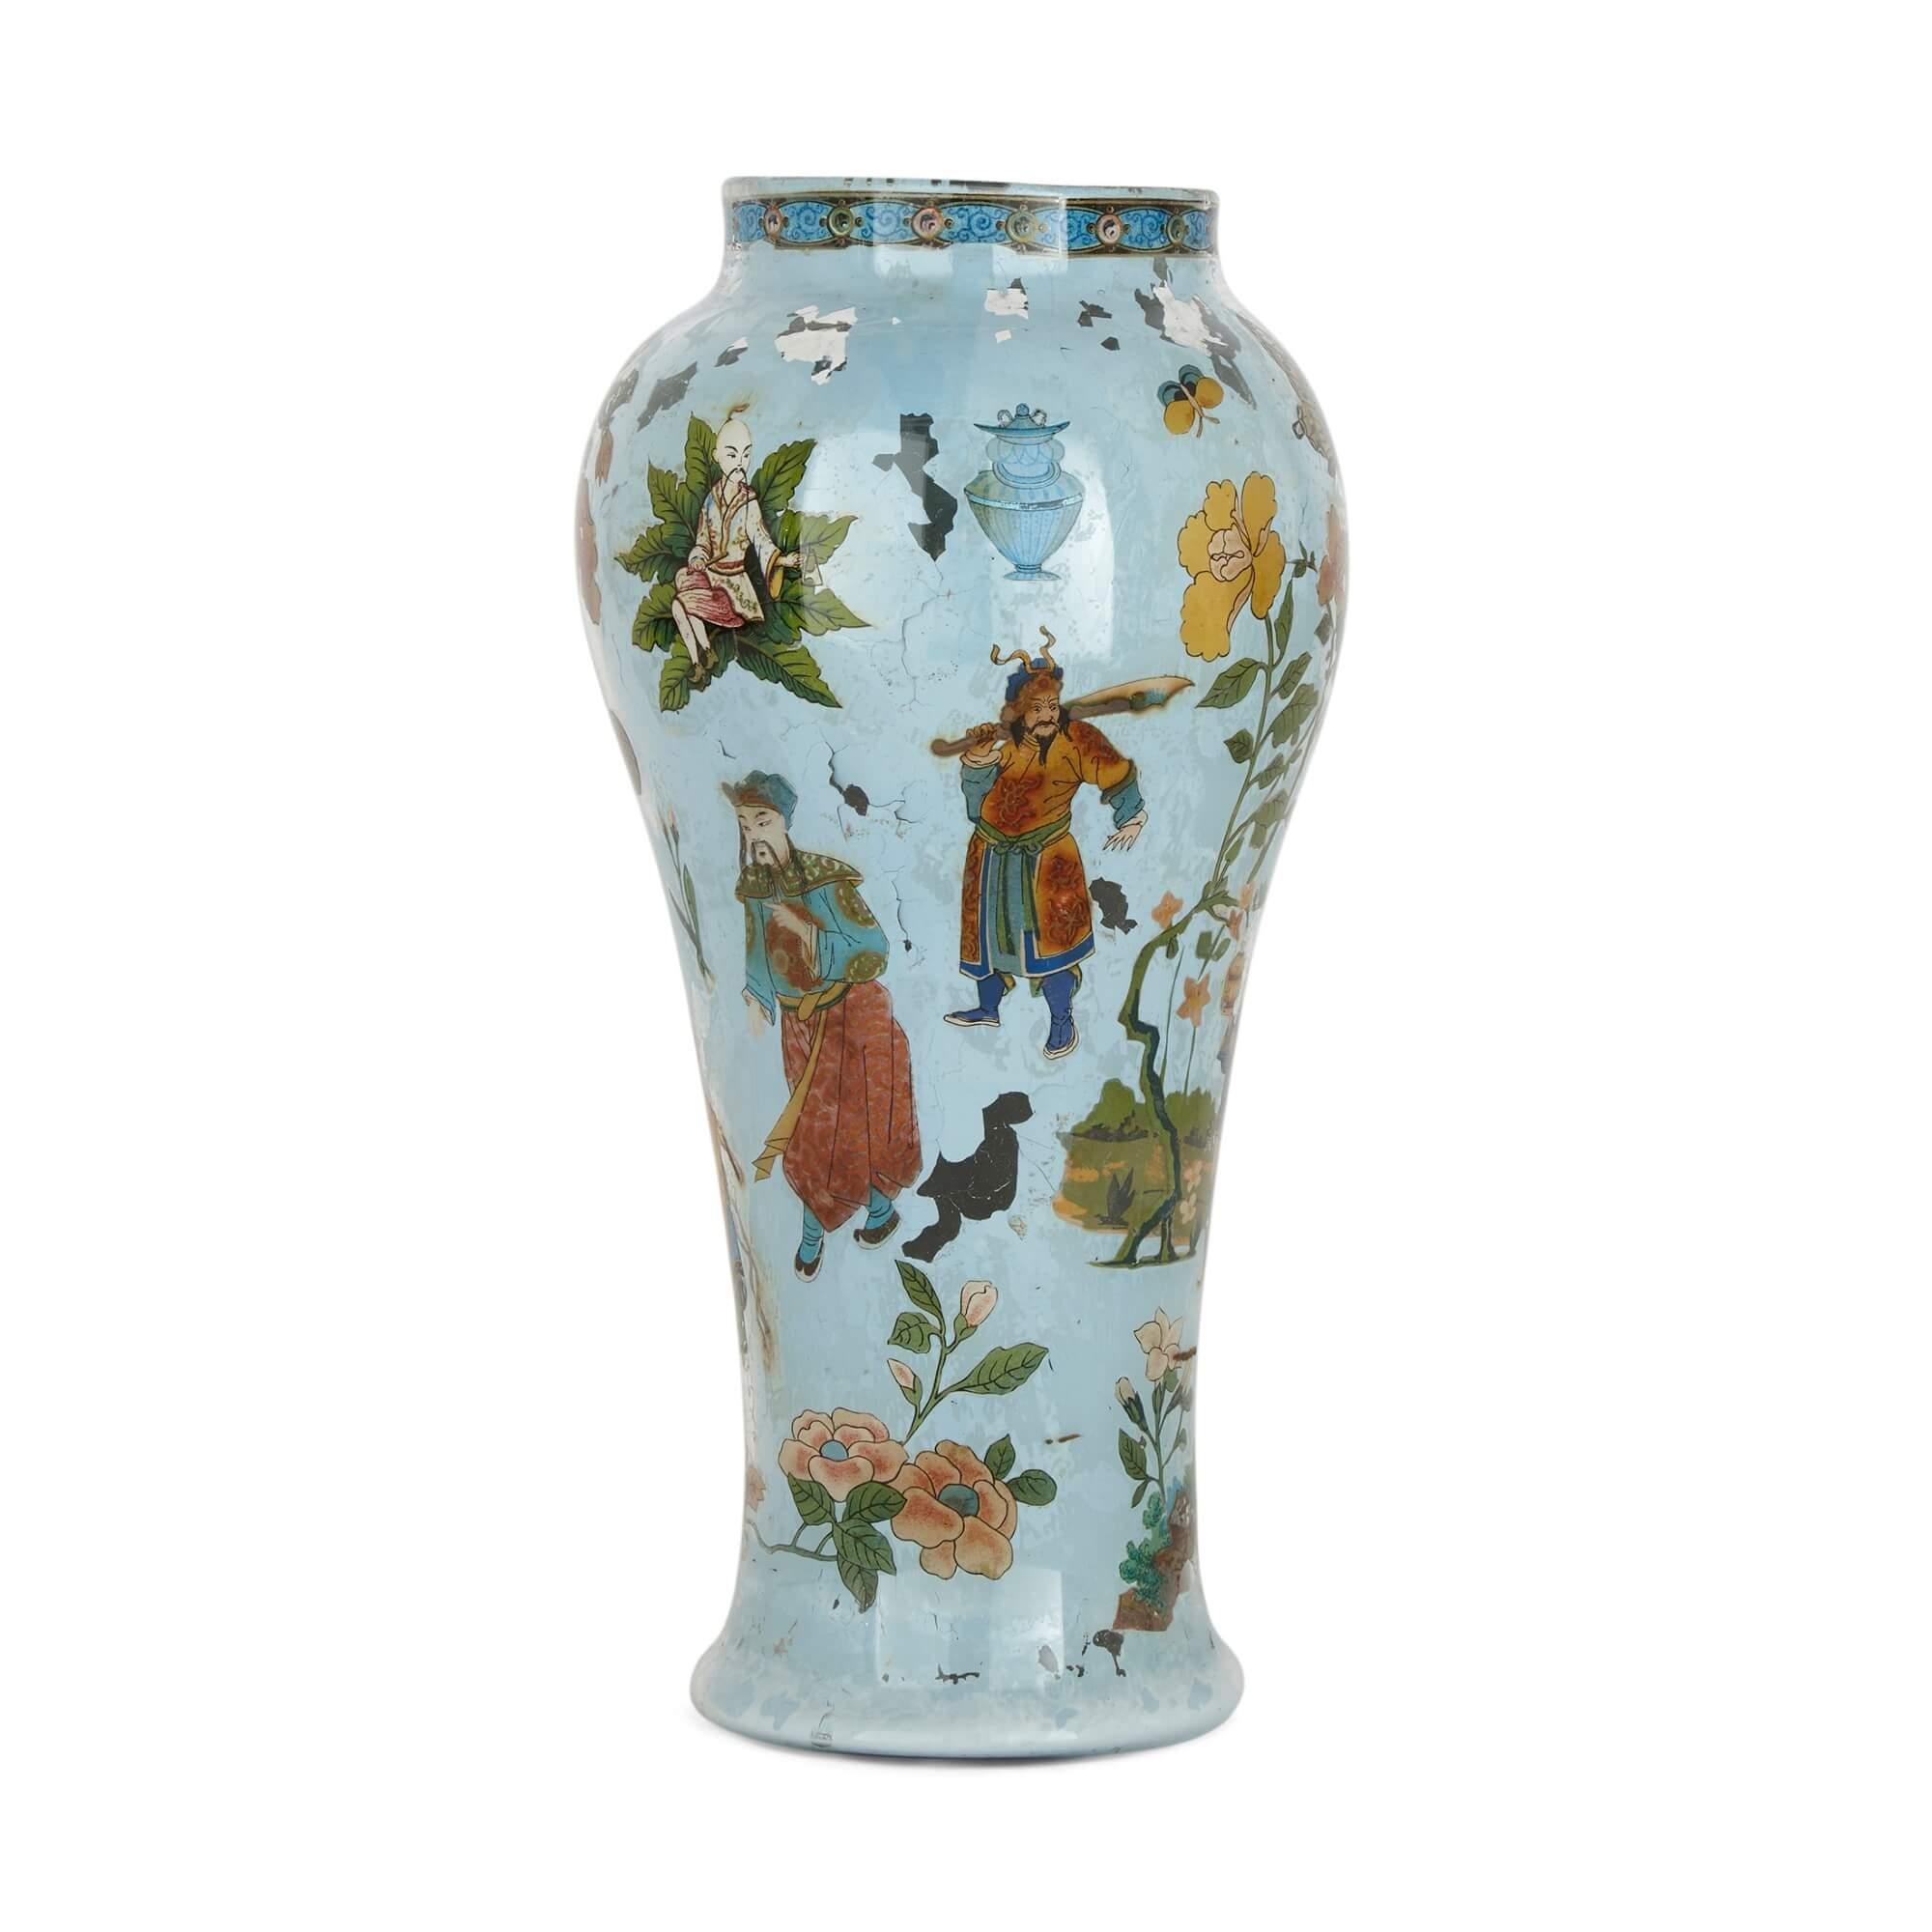 Crafted in the popular 18th century Chinoiserie style, this fine pair of Italian vases are crafted of blown glass, and feature elongated curved bodies. The vases are painted all over with flowers, butterflies, leaves and Chinese figures on a white